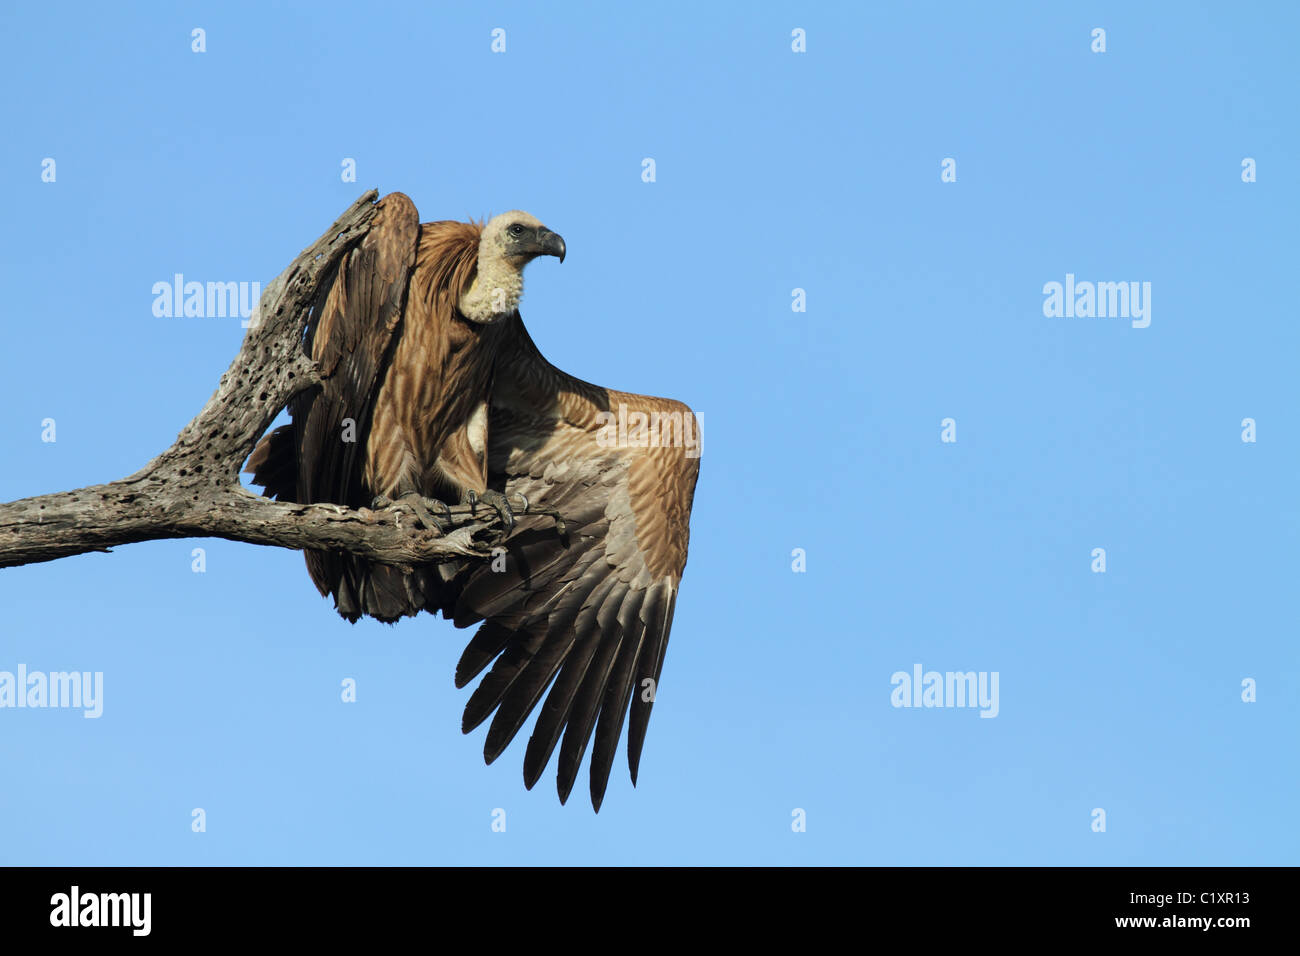 Whitebacked vulture perched with one wing open Stock Photo